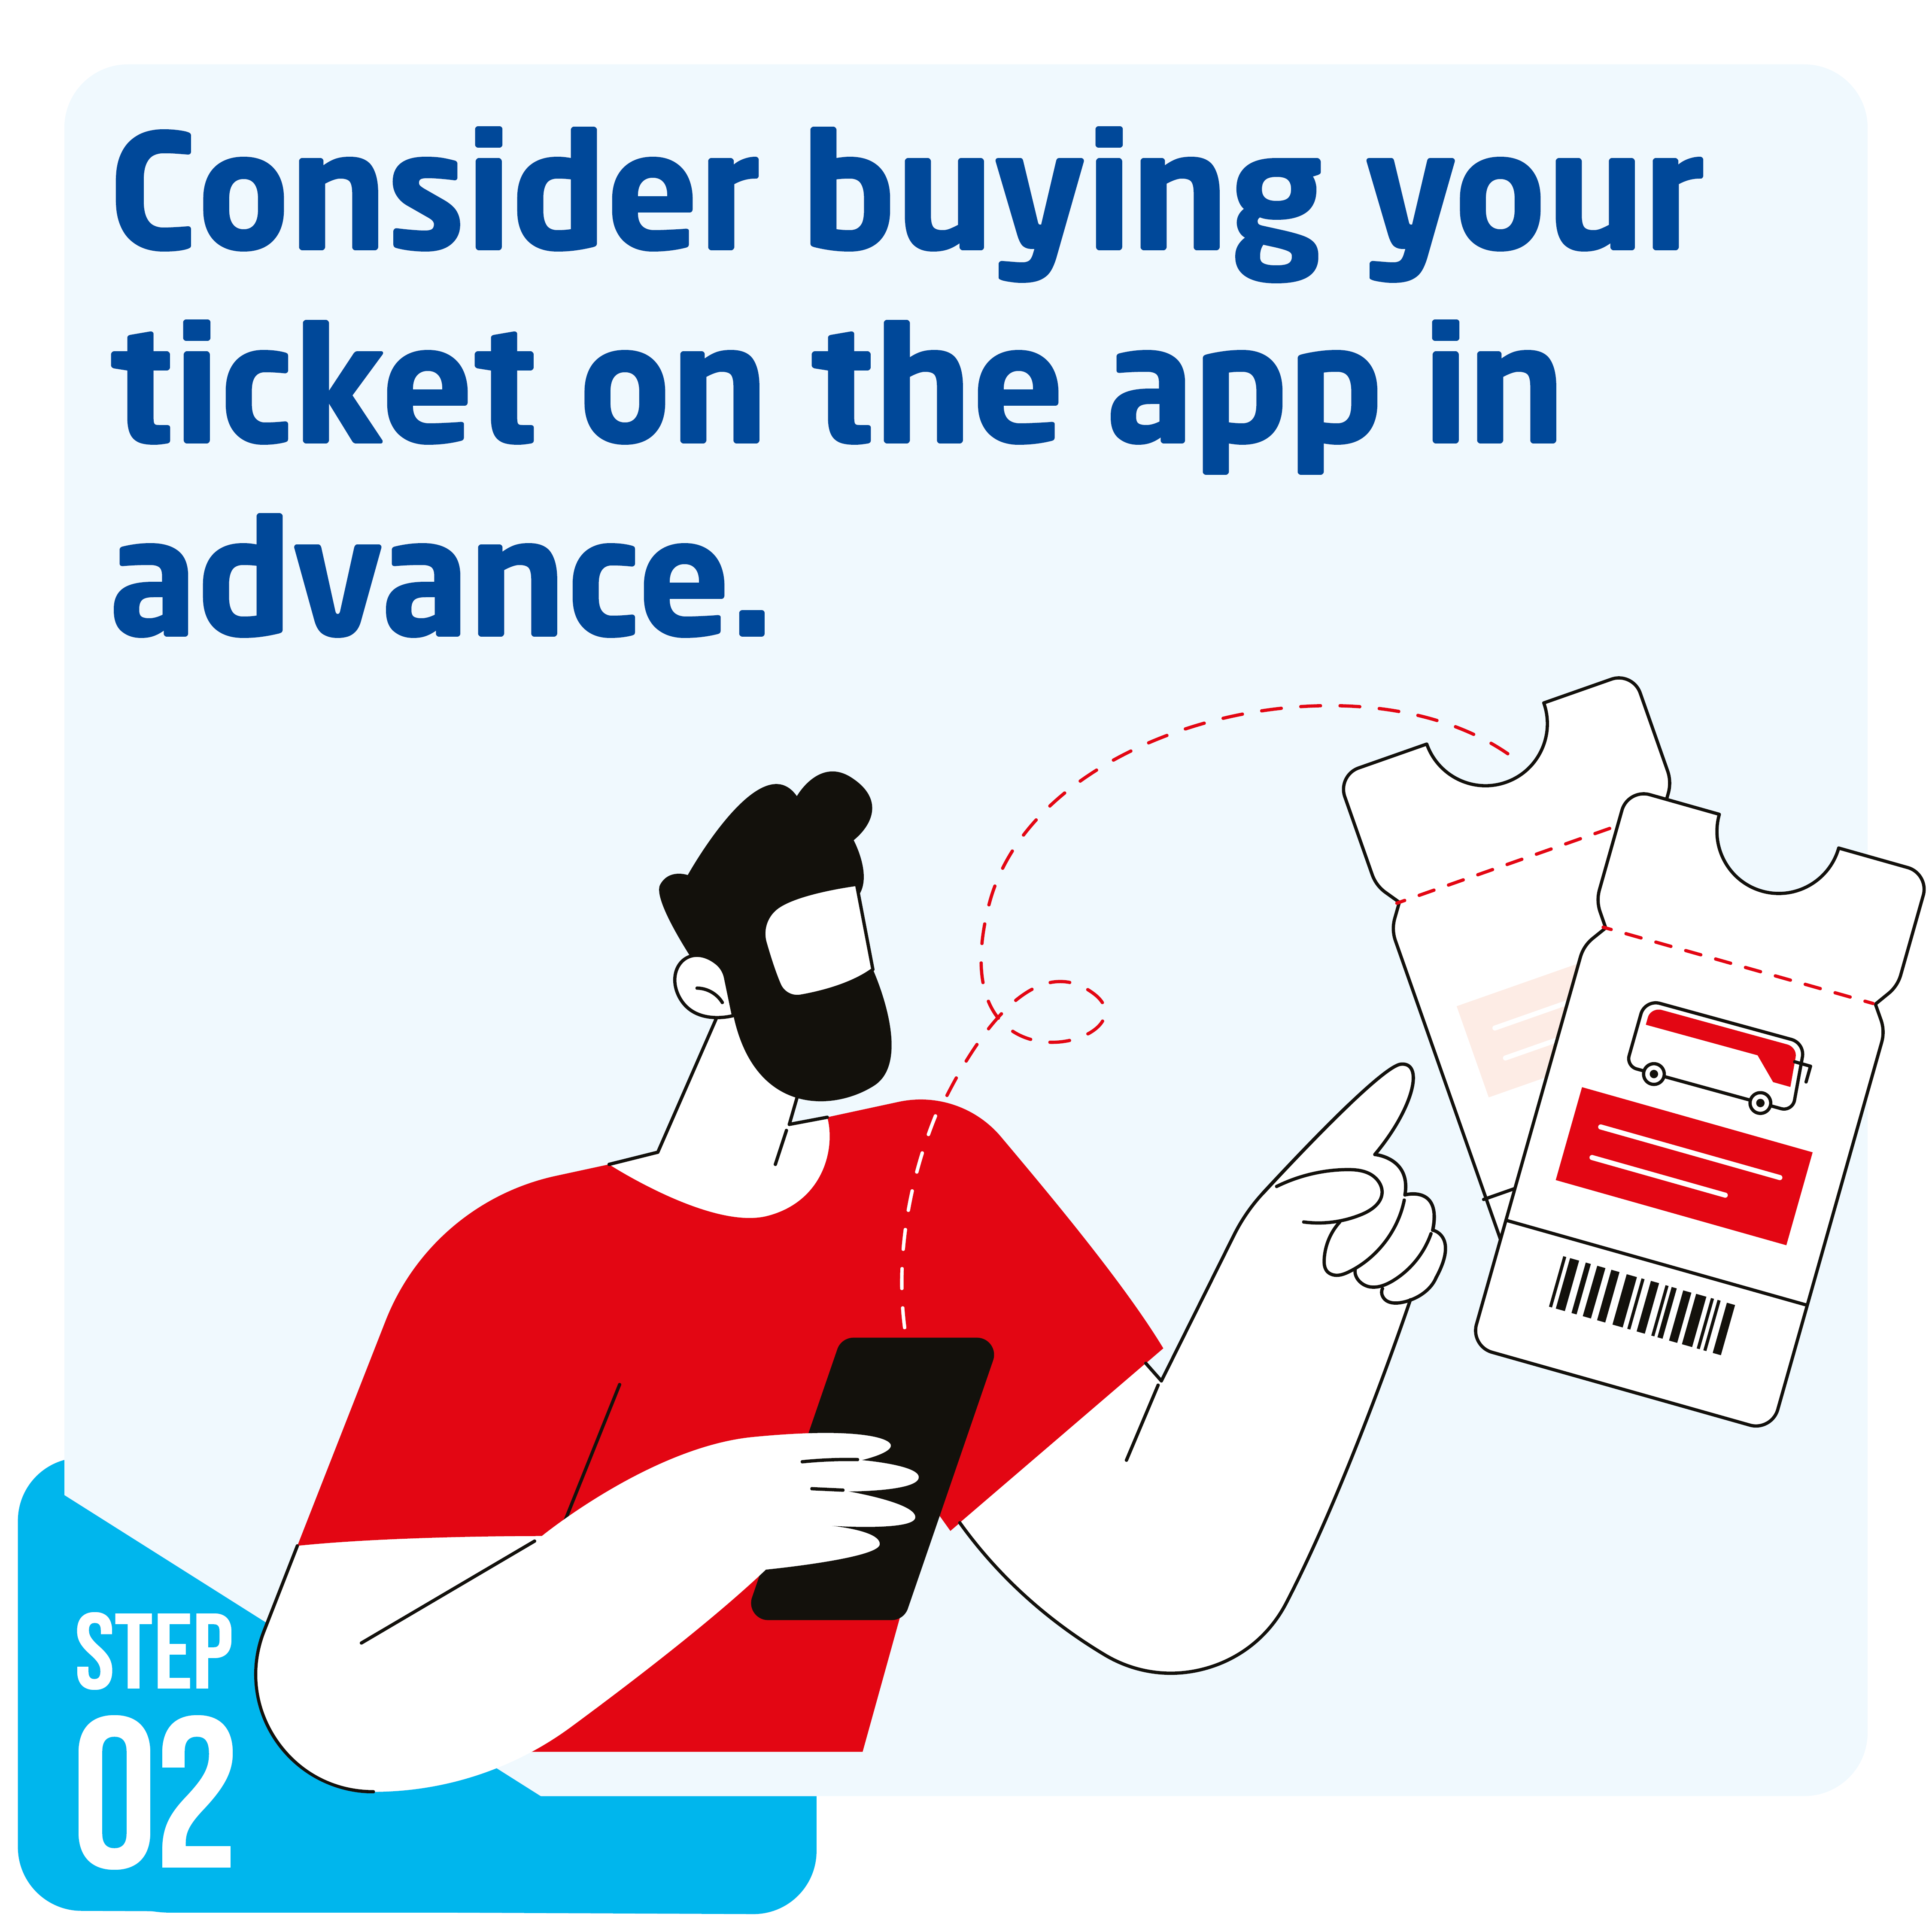 Consider buying your ticket on the app image of a man with his phone and a ticket